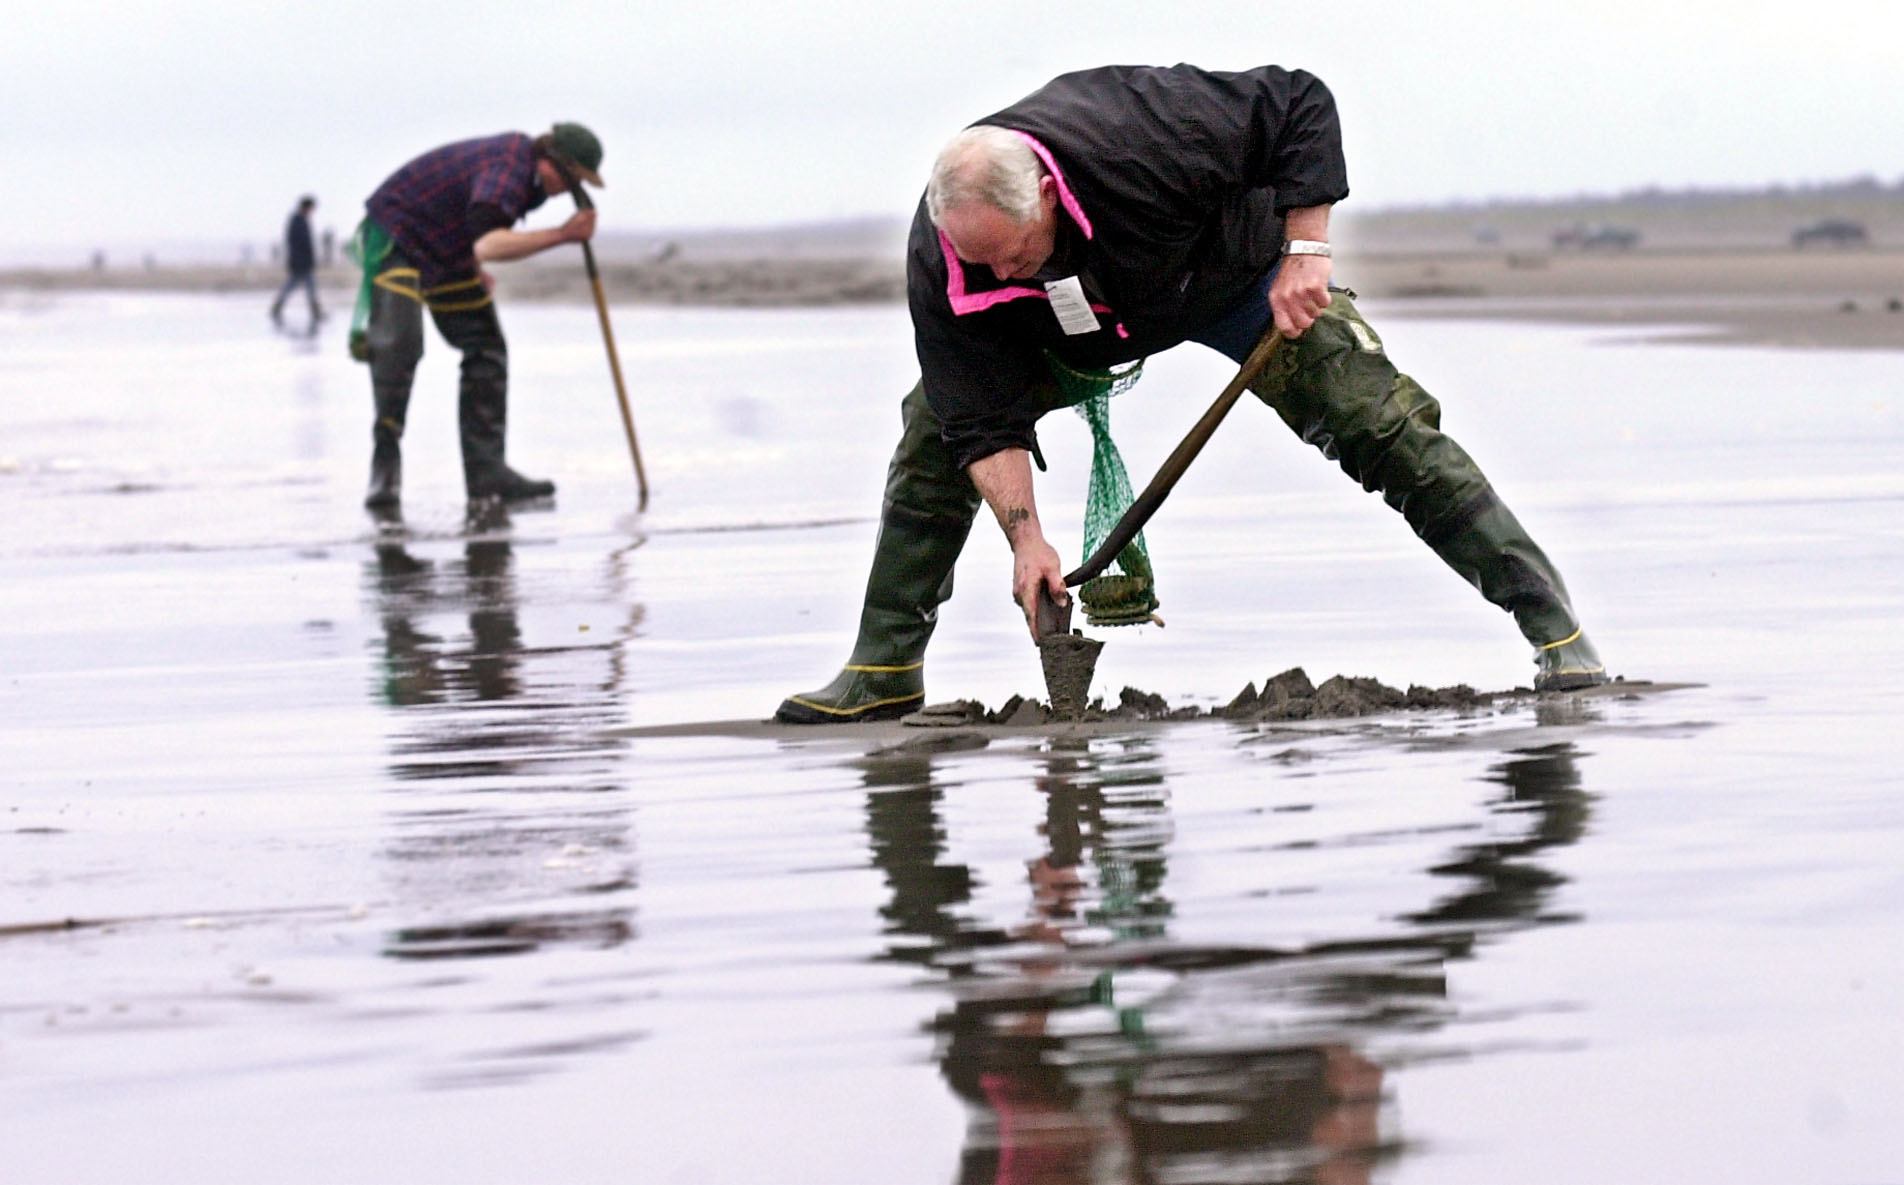 Long Beach opens for razor clam digging - The Columbian